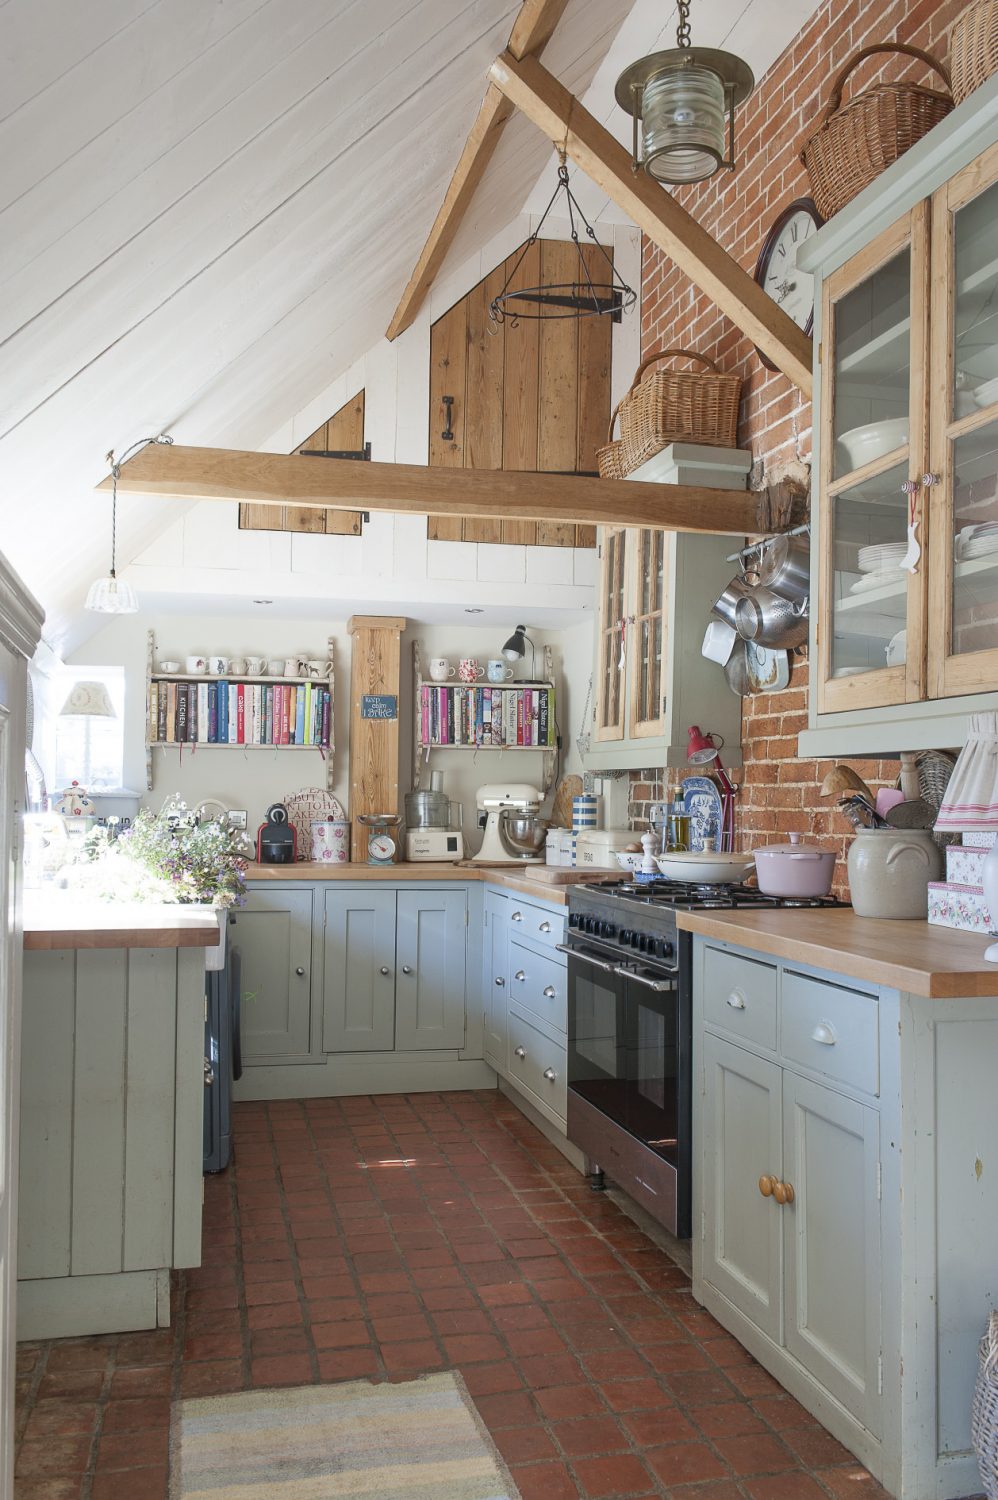 The kitchen sits under the catslide roof at the back of the farmhouse and is made from a host of up-cycled and recycled materials